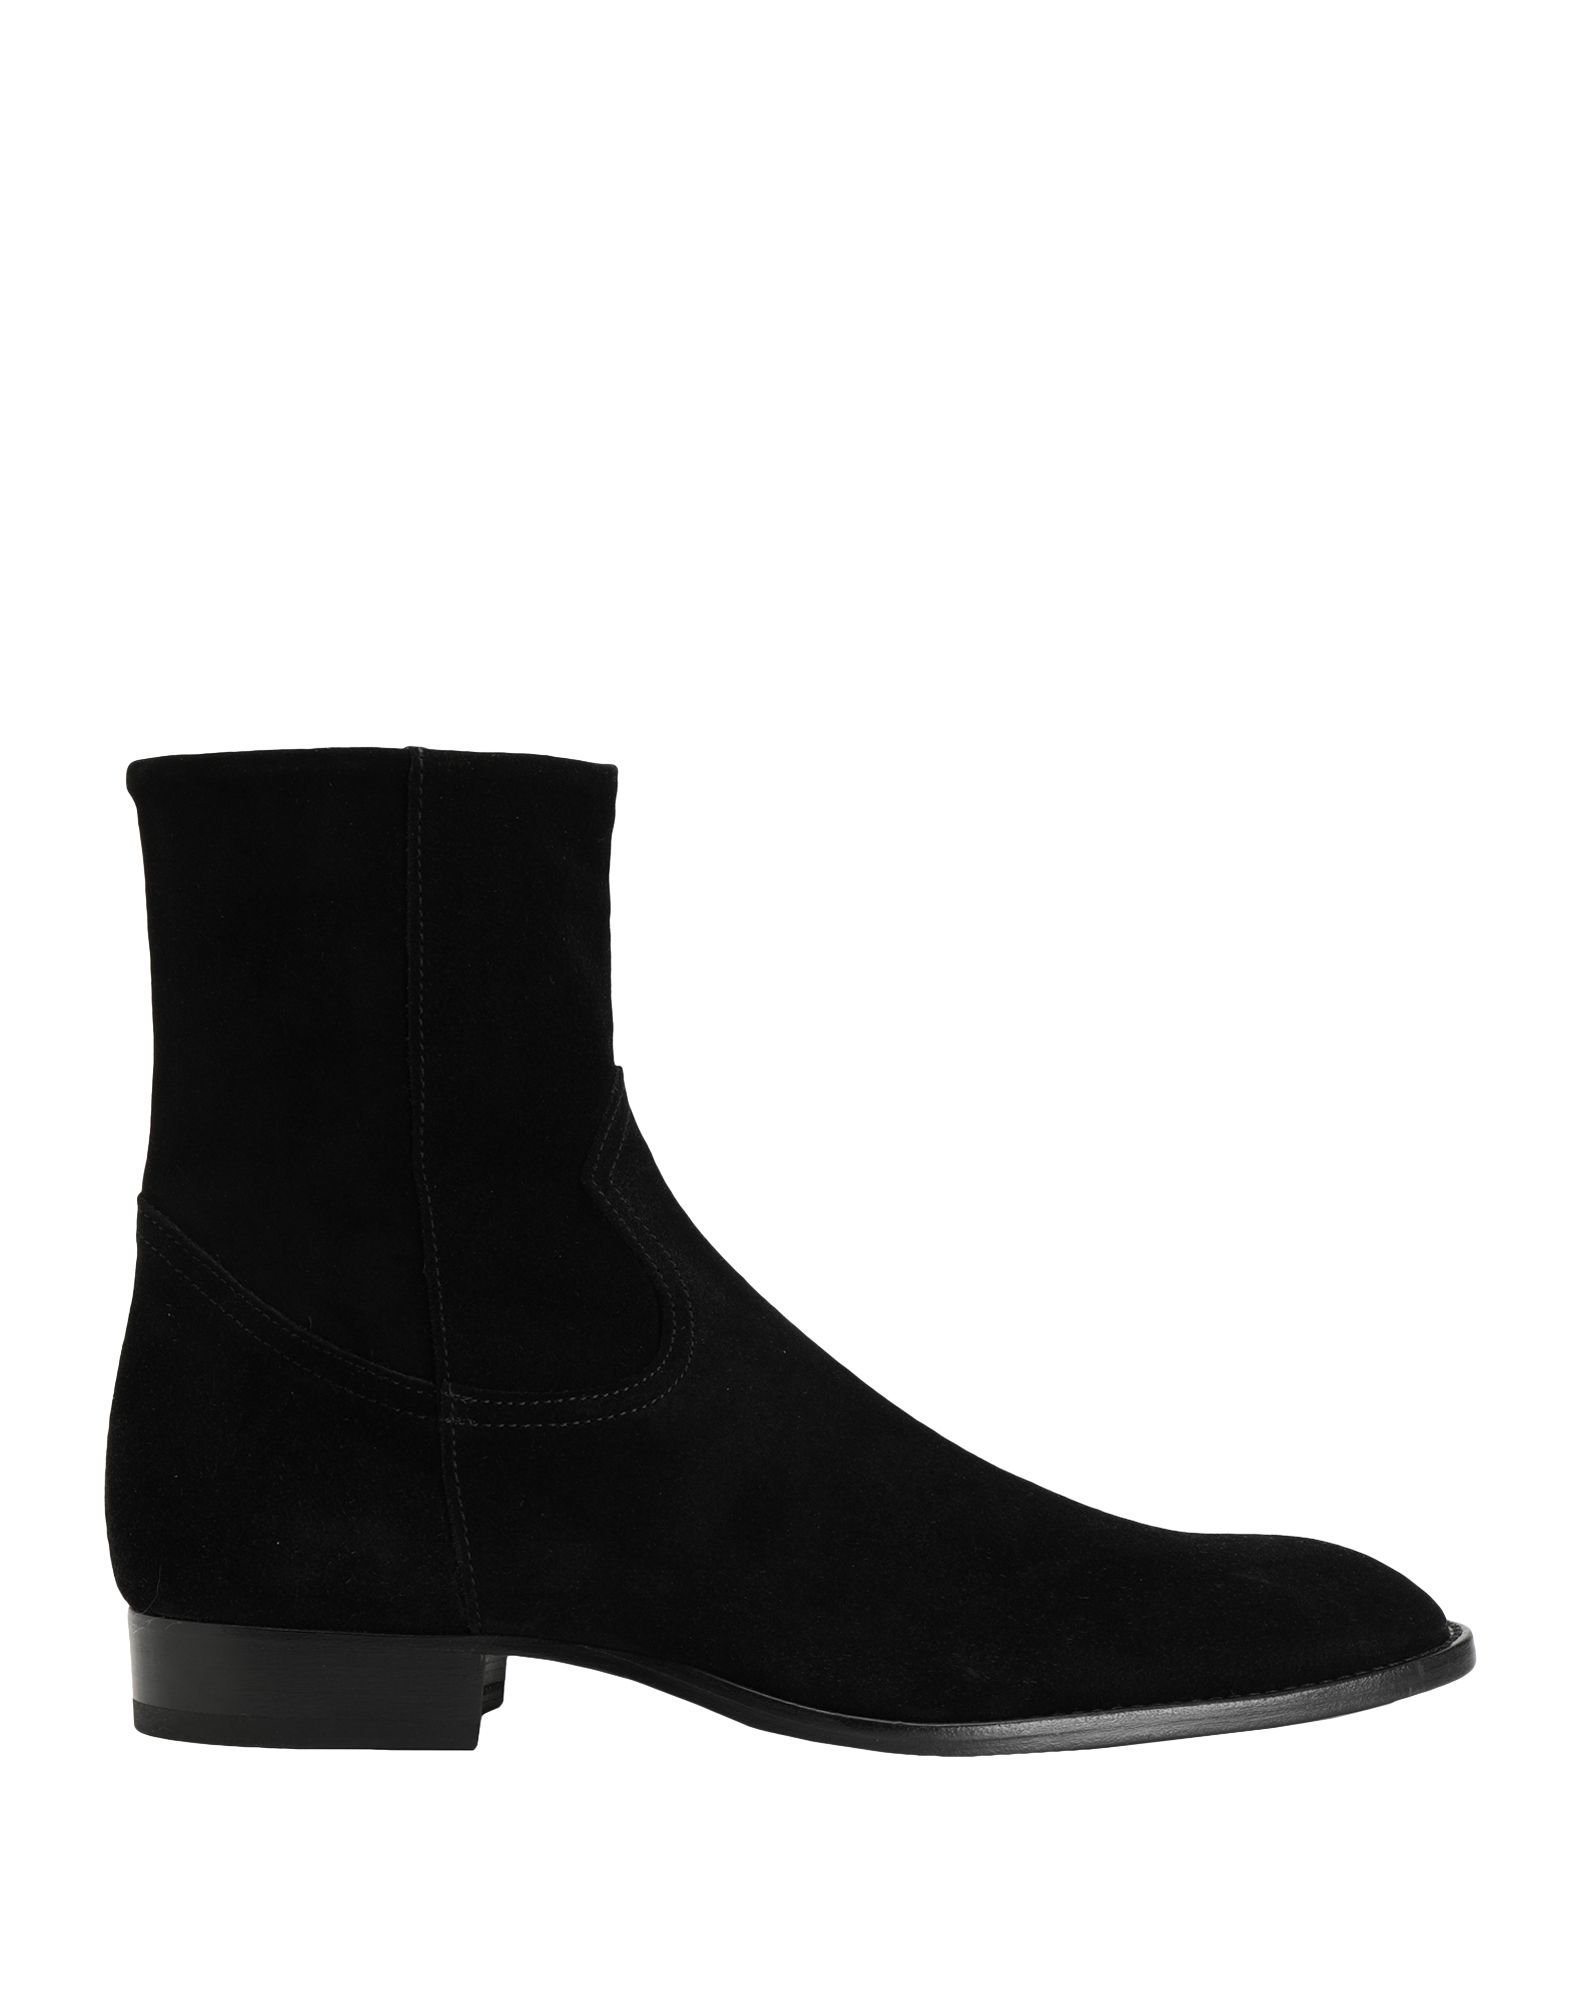 8 by YOOX Ankle boots - Item 11927325